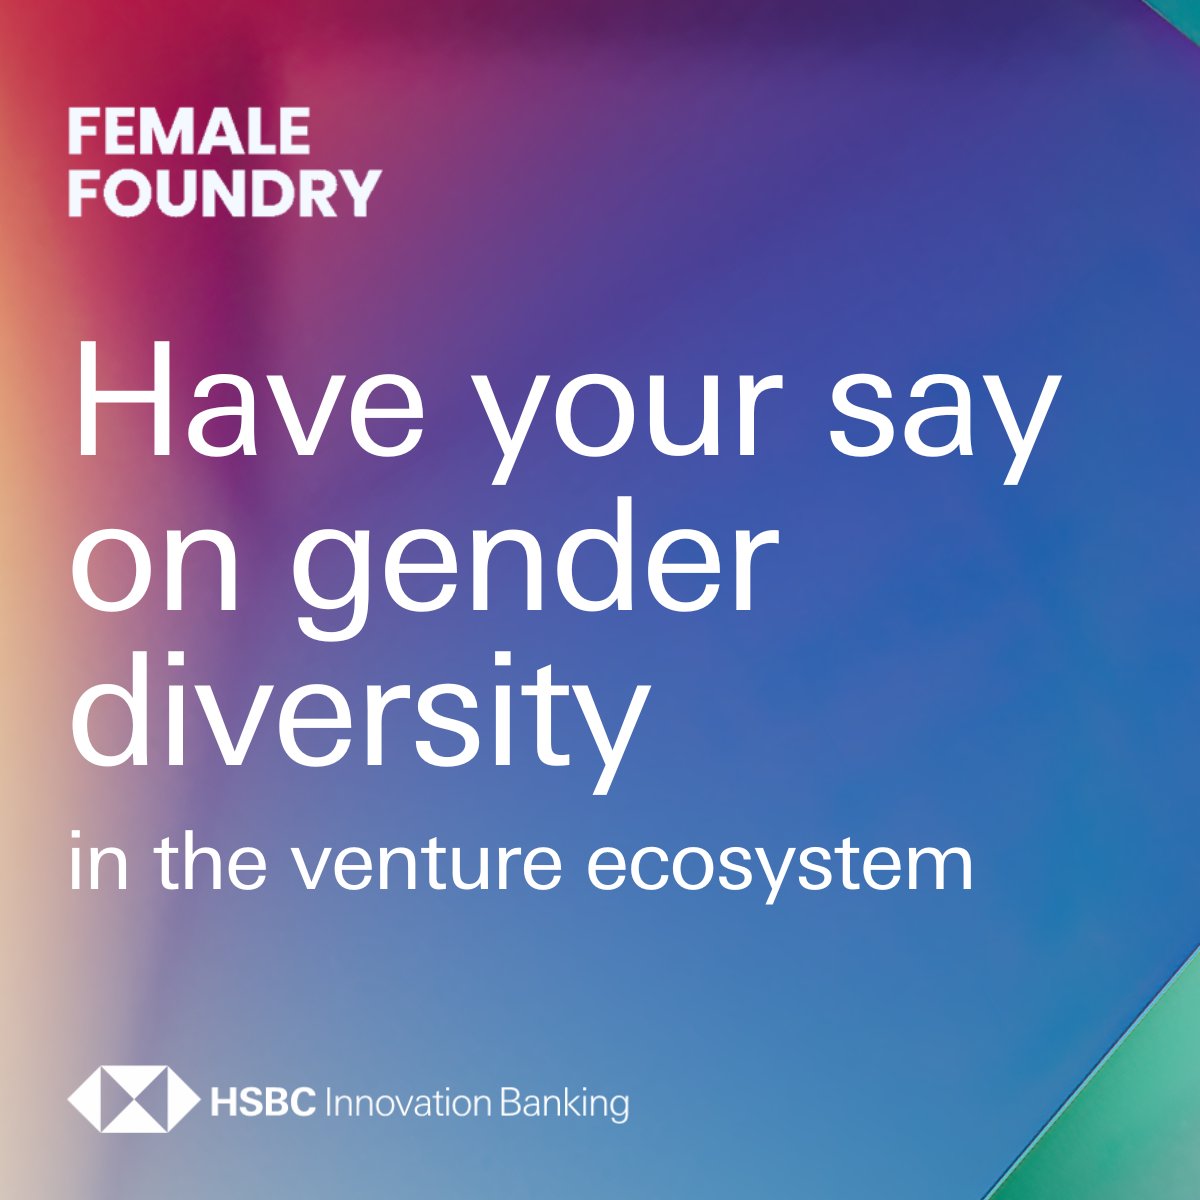 Want to play your part in shaping the future of European venture? Share your thoughts in the State of Gender Diversity in European Venture survey: just 3 minutes required. Proud to partner on this initiative from @femalefoundry grp.hsbc/6016ugFL6 #FutureOfVenture2023